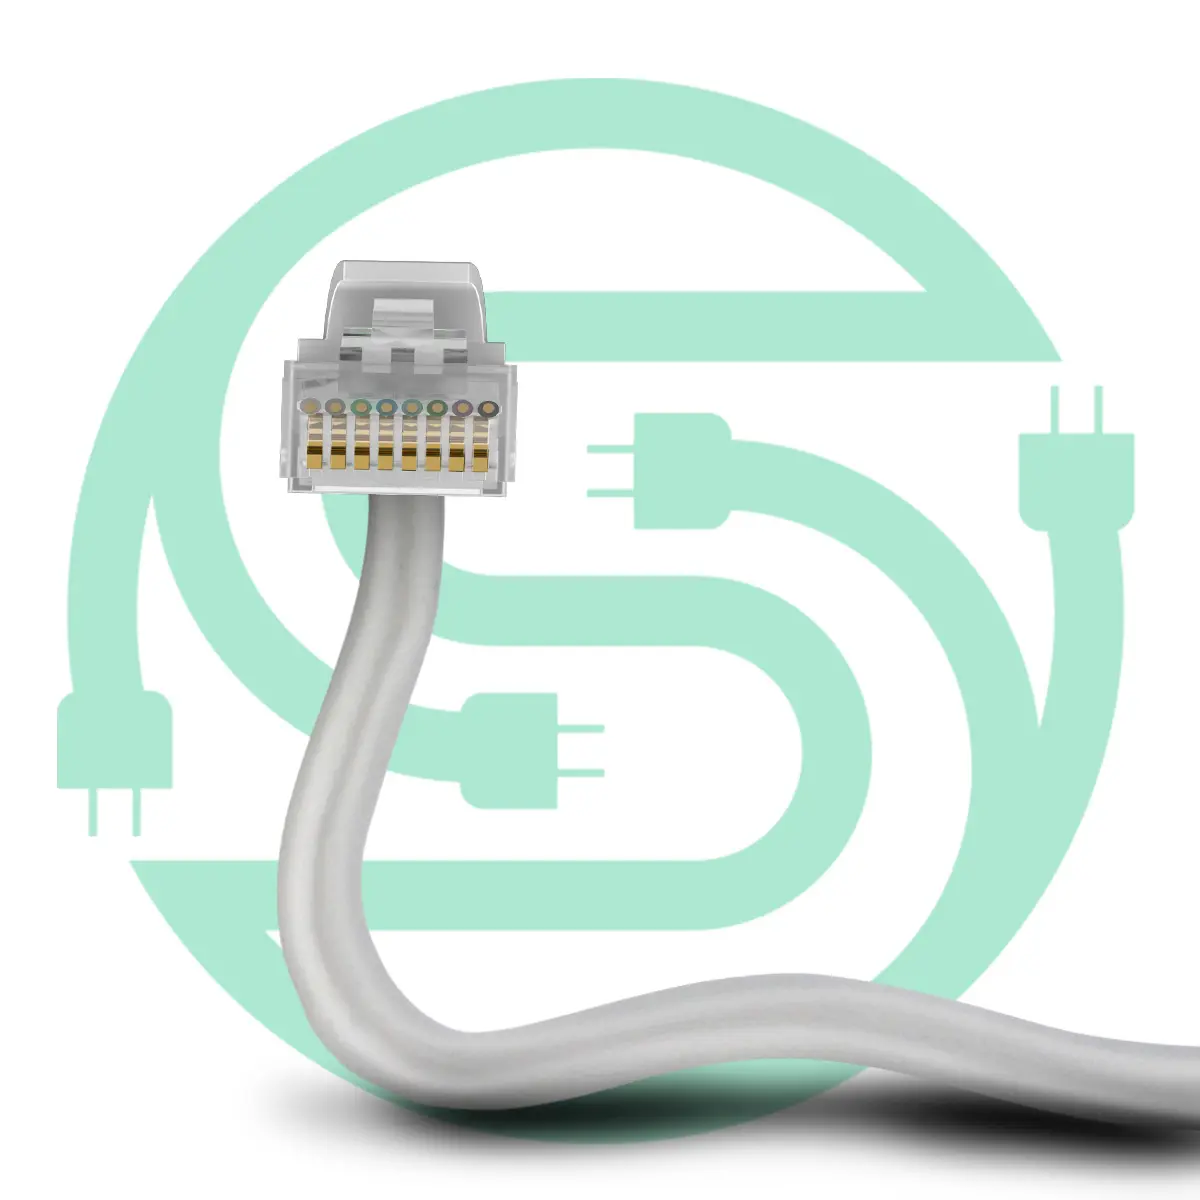 3M CATEGORY 6 Lan Cable RJ45 Plug CAT.6 Patch Cord cat6 cable